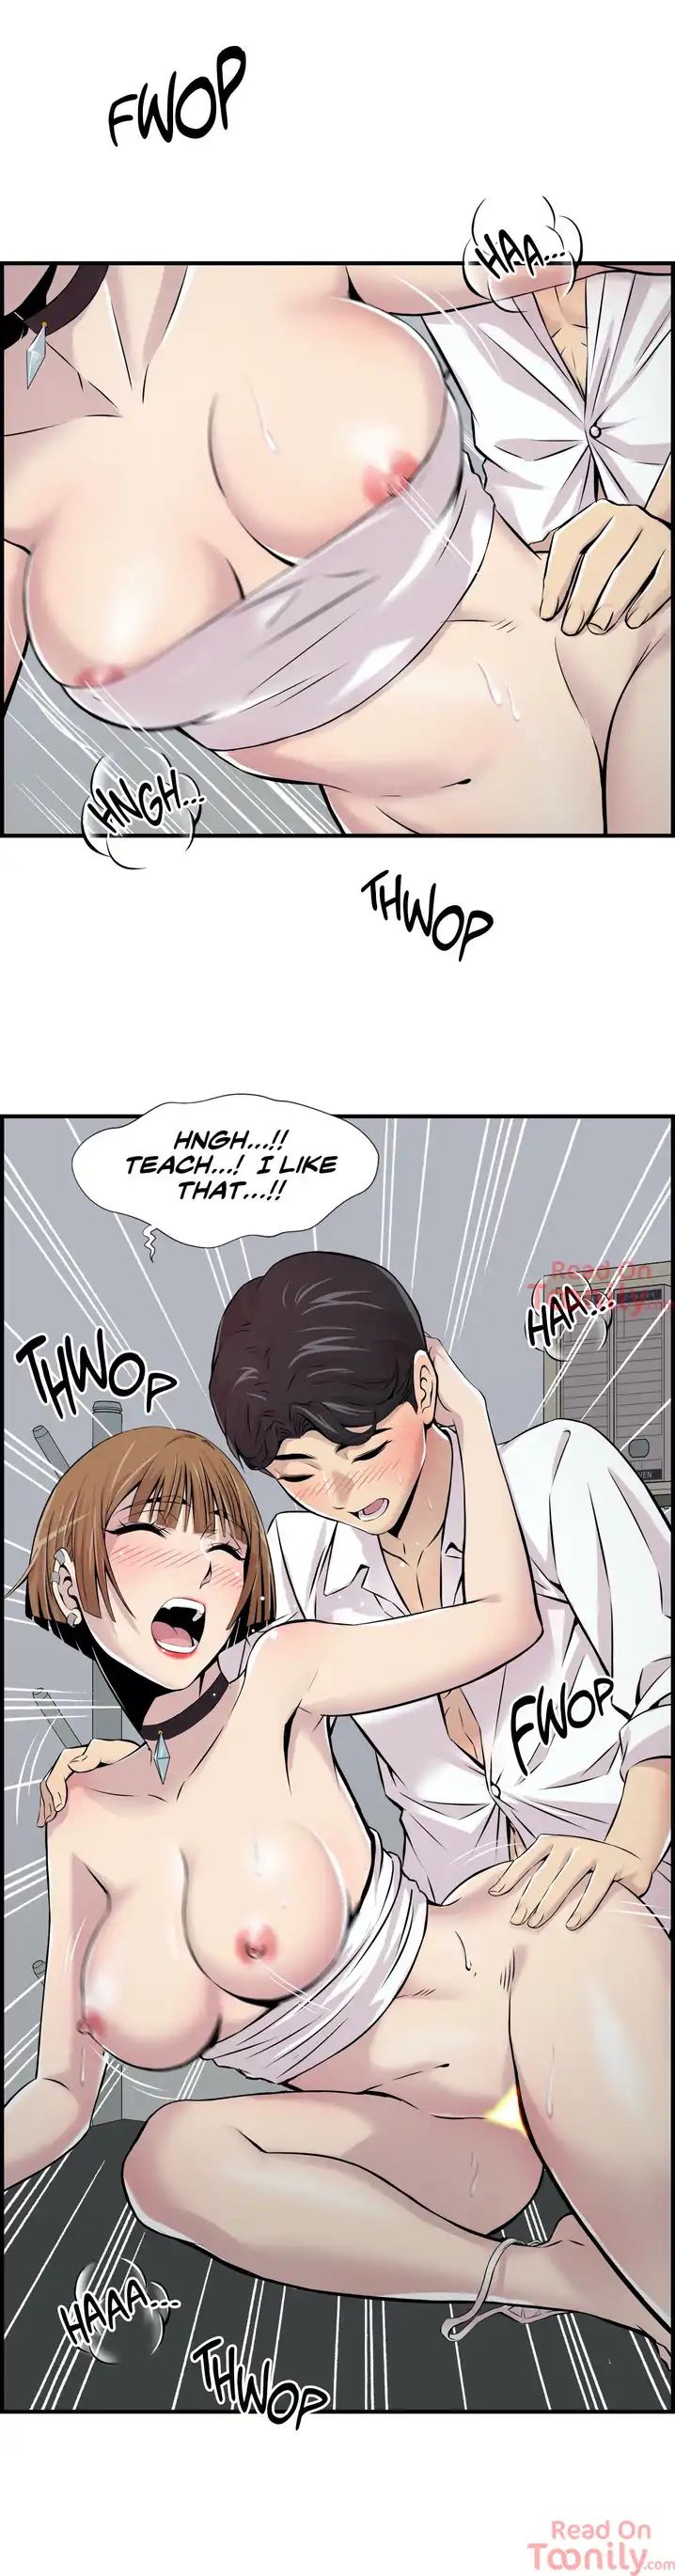 Cram School Scandal - Chapter 2 Page 37